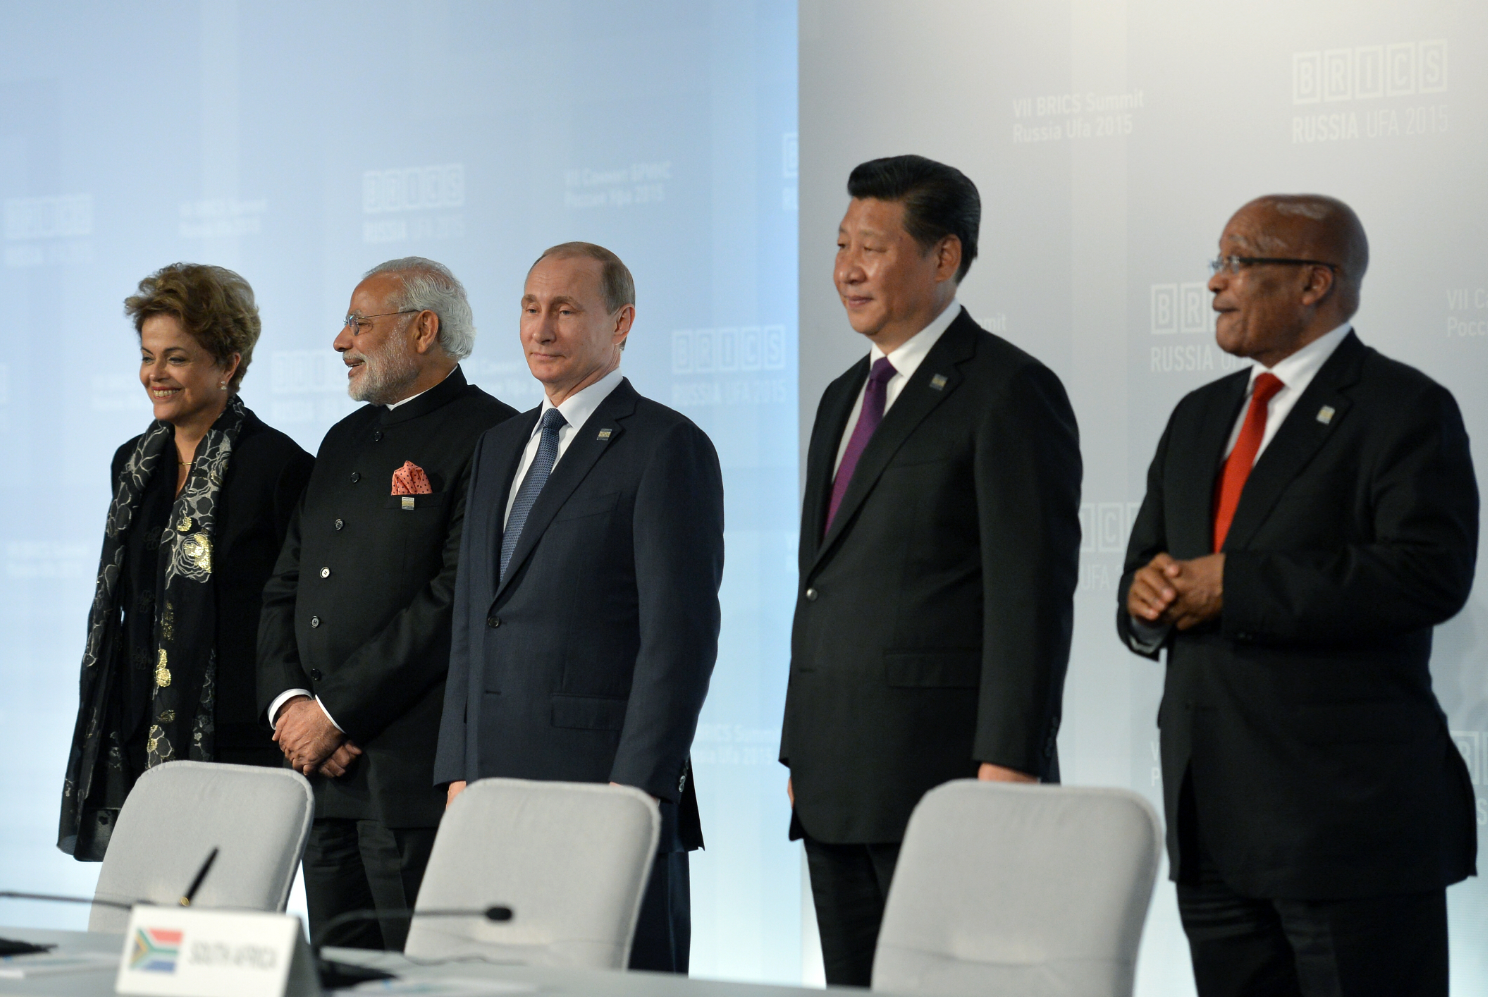 Preparations for the 8th BRICS summit in Goa have begun.